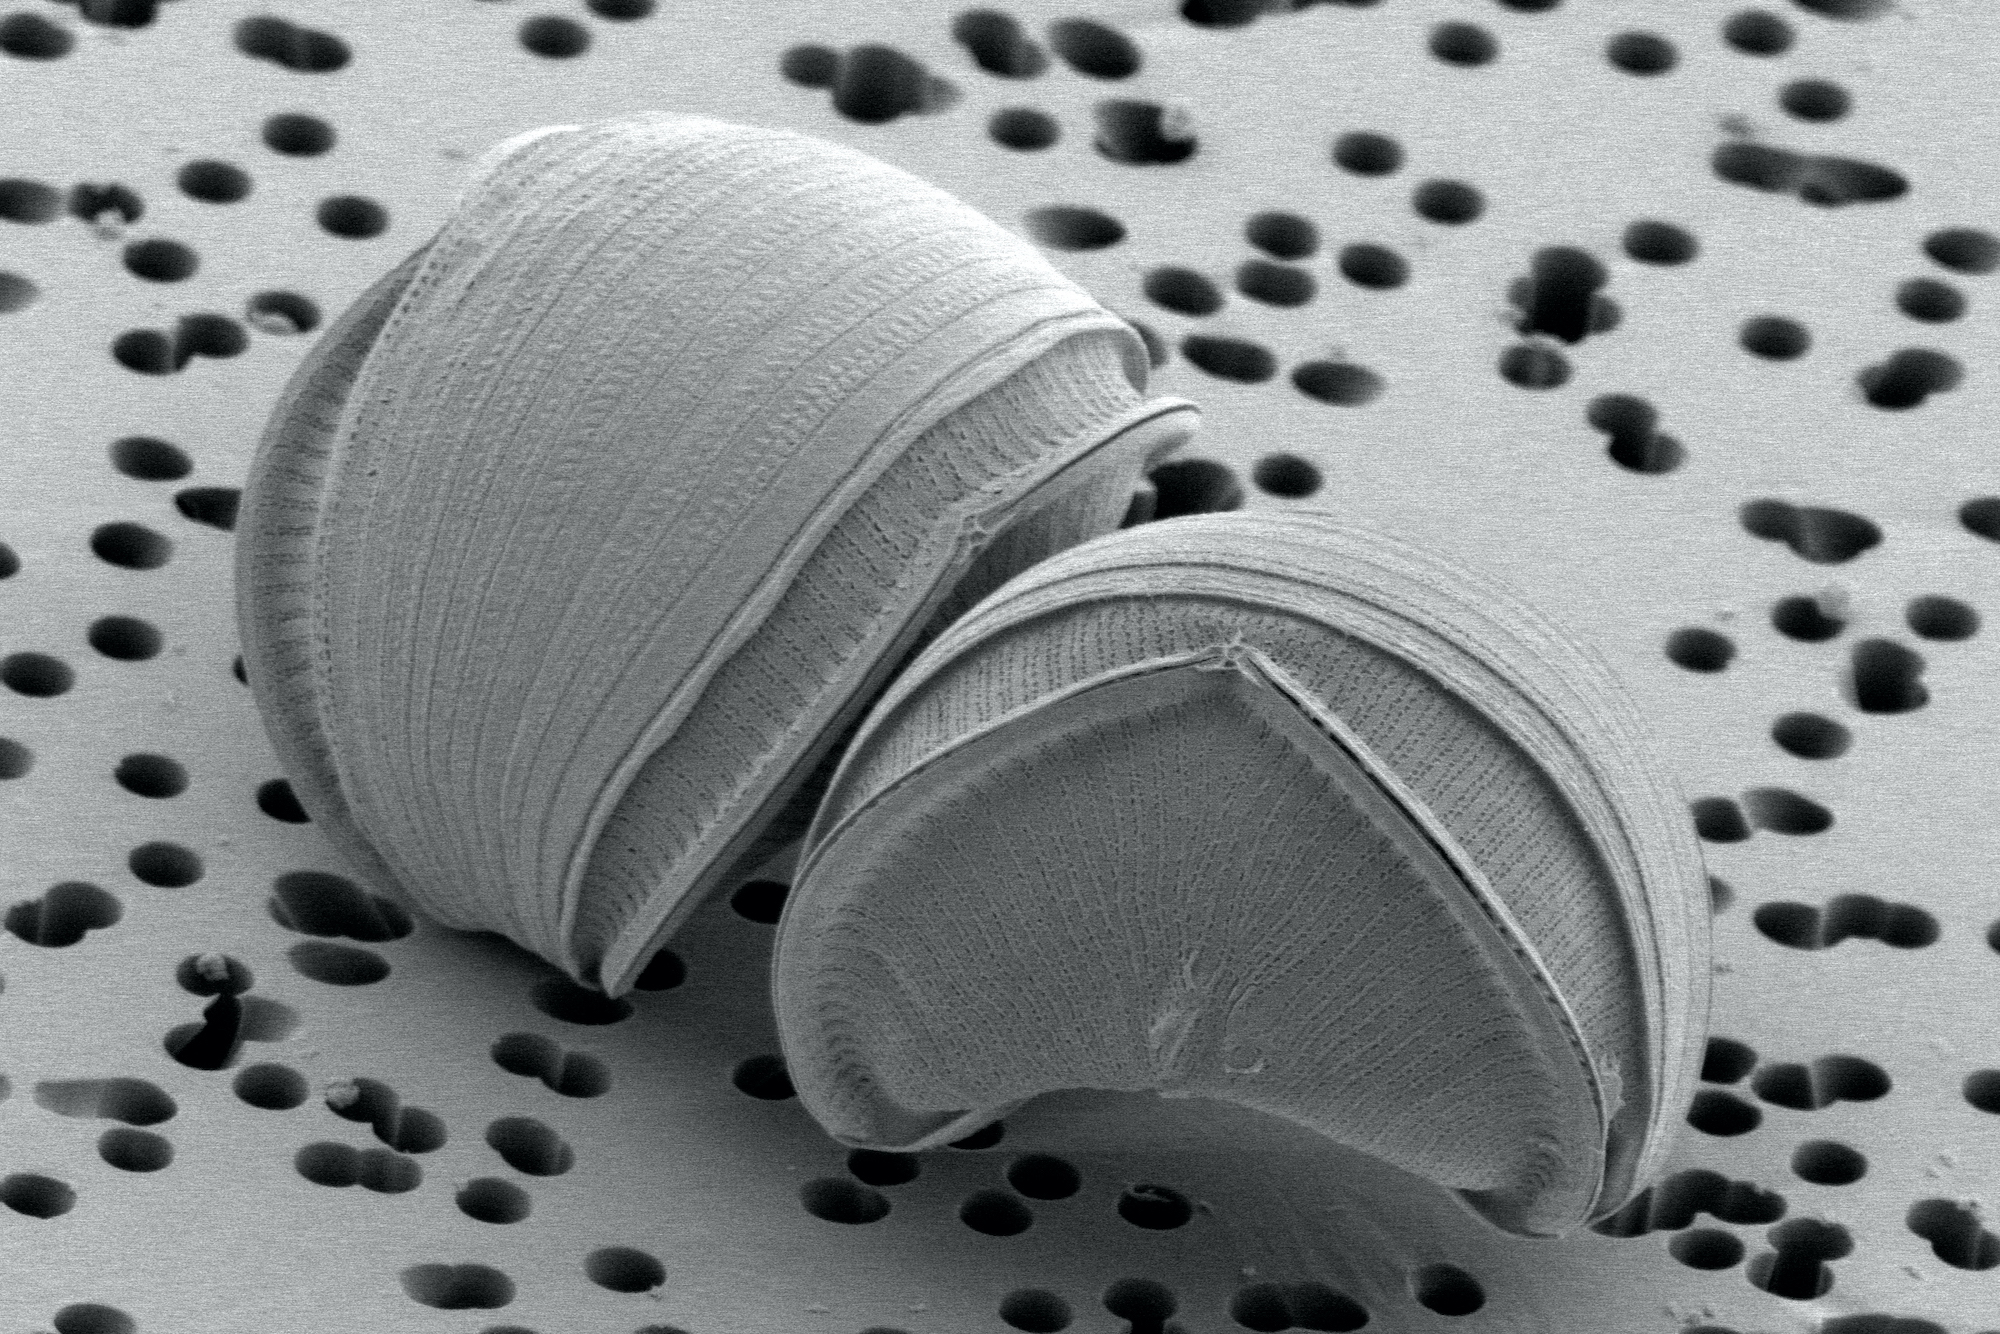 One of the new diatom species, Epithemia pelagica, as seen under a scanning electron microscope.